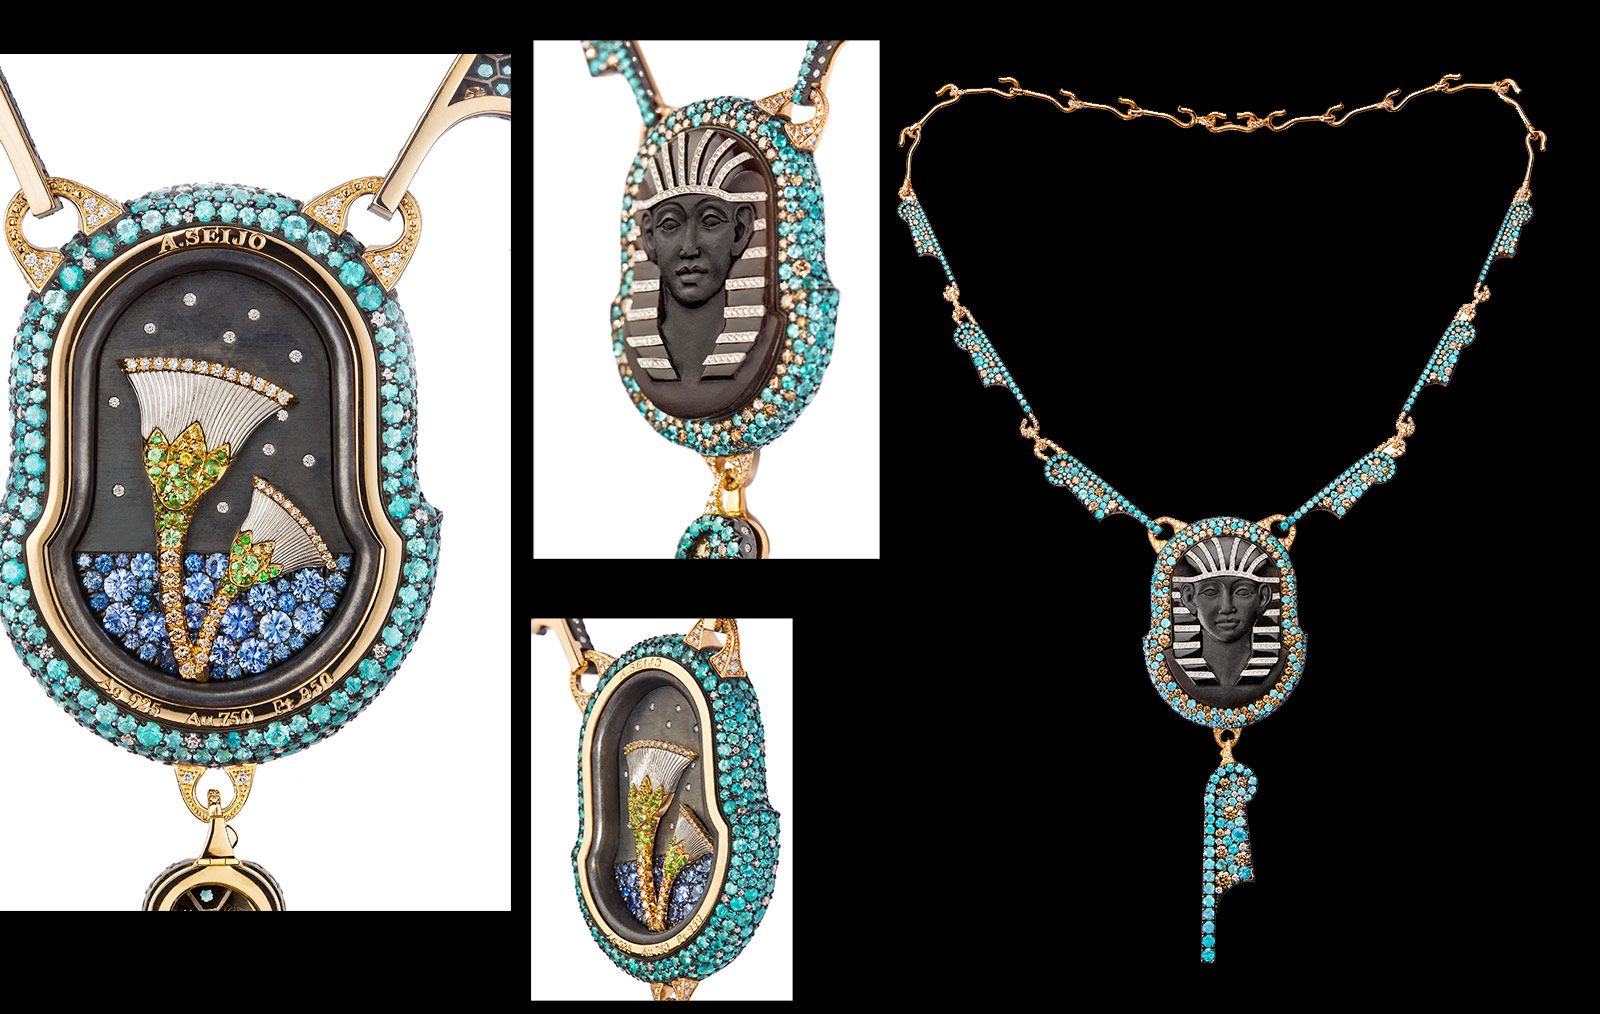 Antonio Seijo Pharoah necklace decorated from the front and the back with attention to minute details 